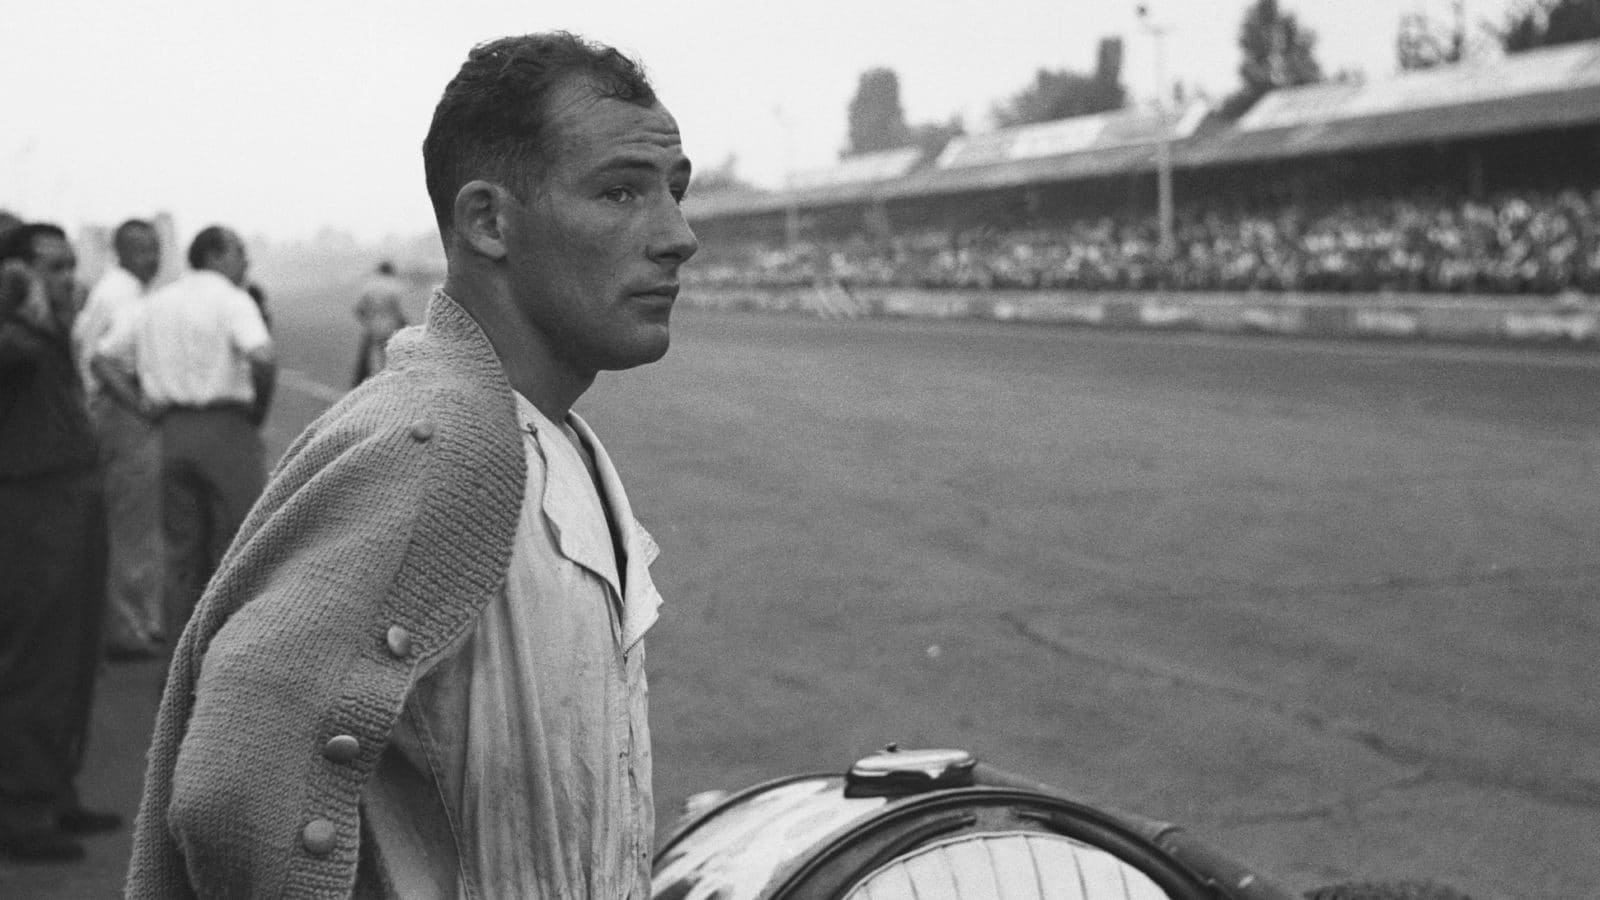 Stirling Moss watches from the side of the track at the 1954 Italian Grand Prix